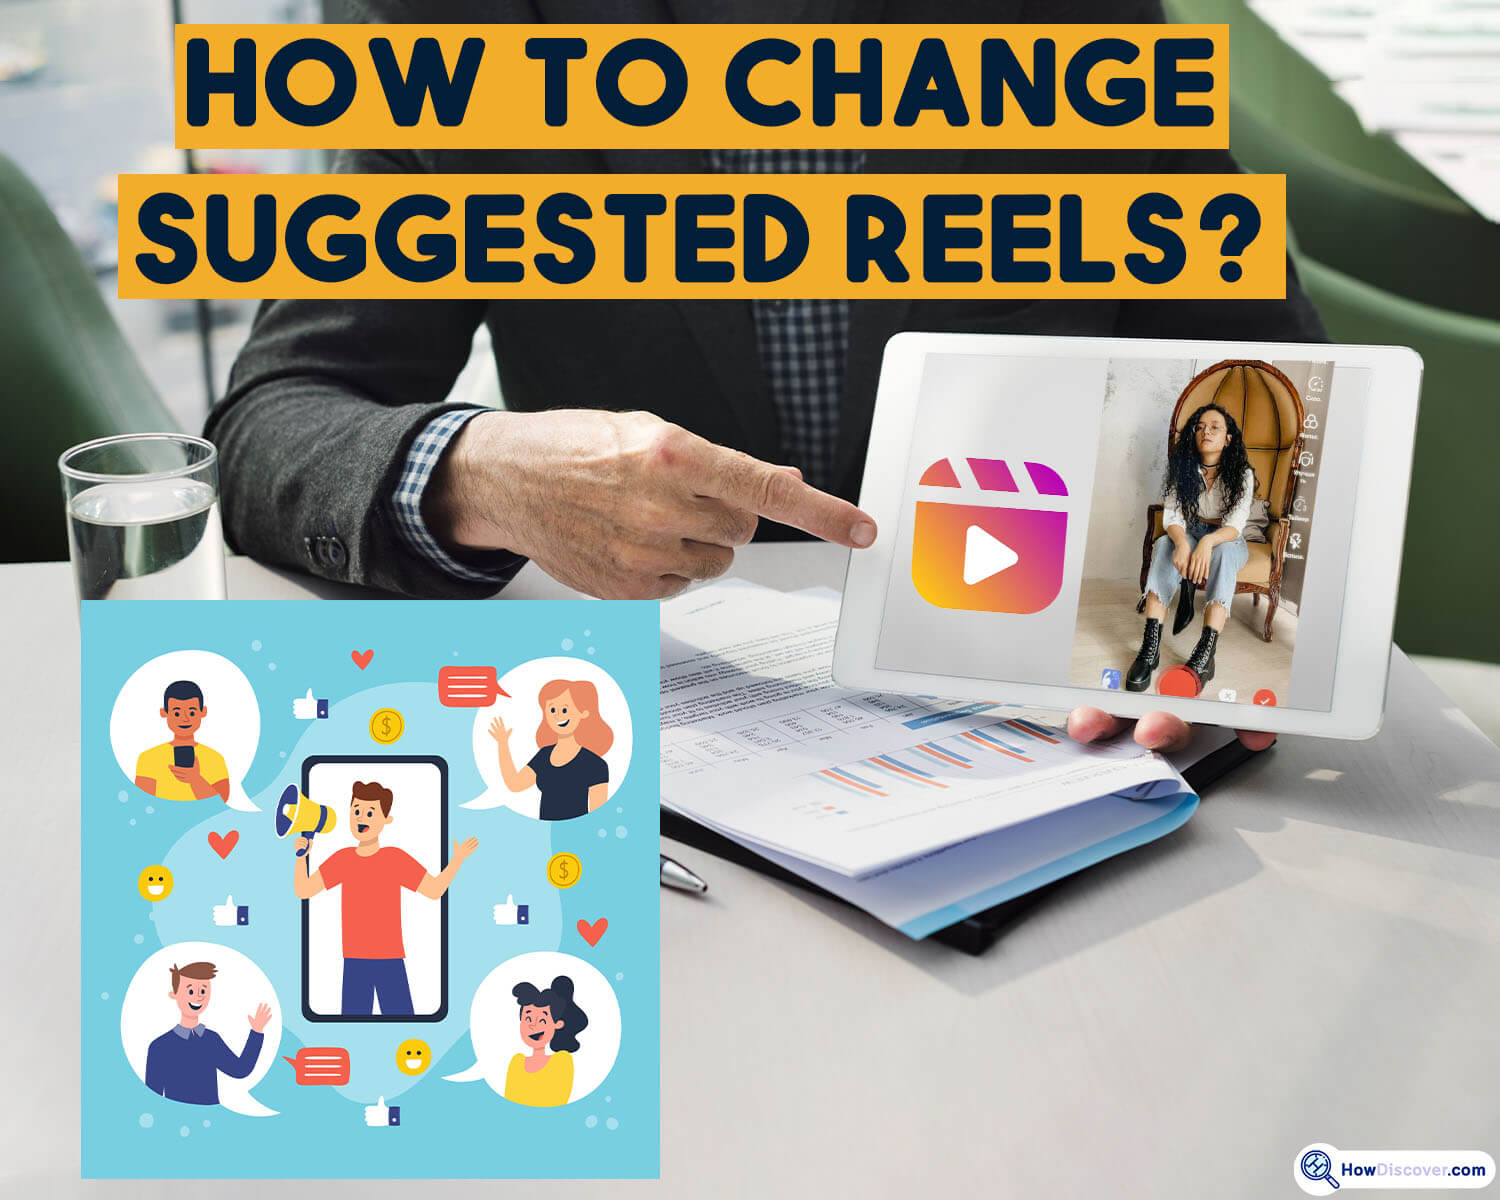 How to Change Suggested Reels on Instagram